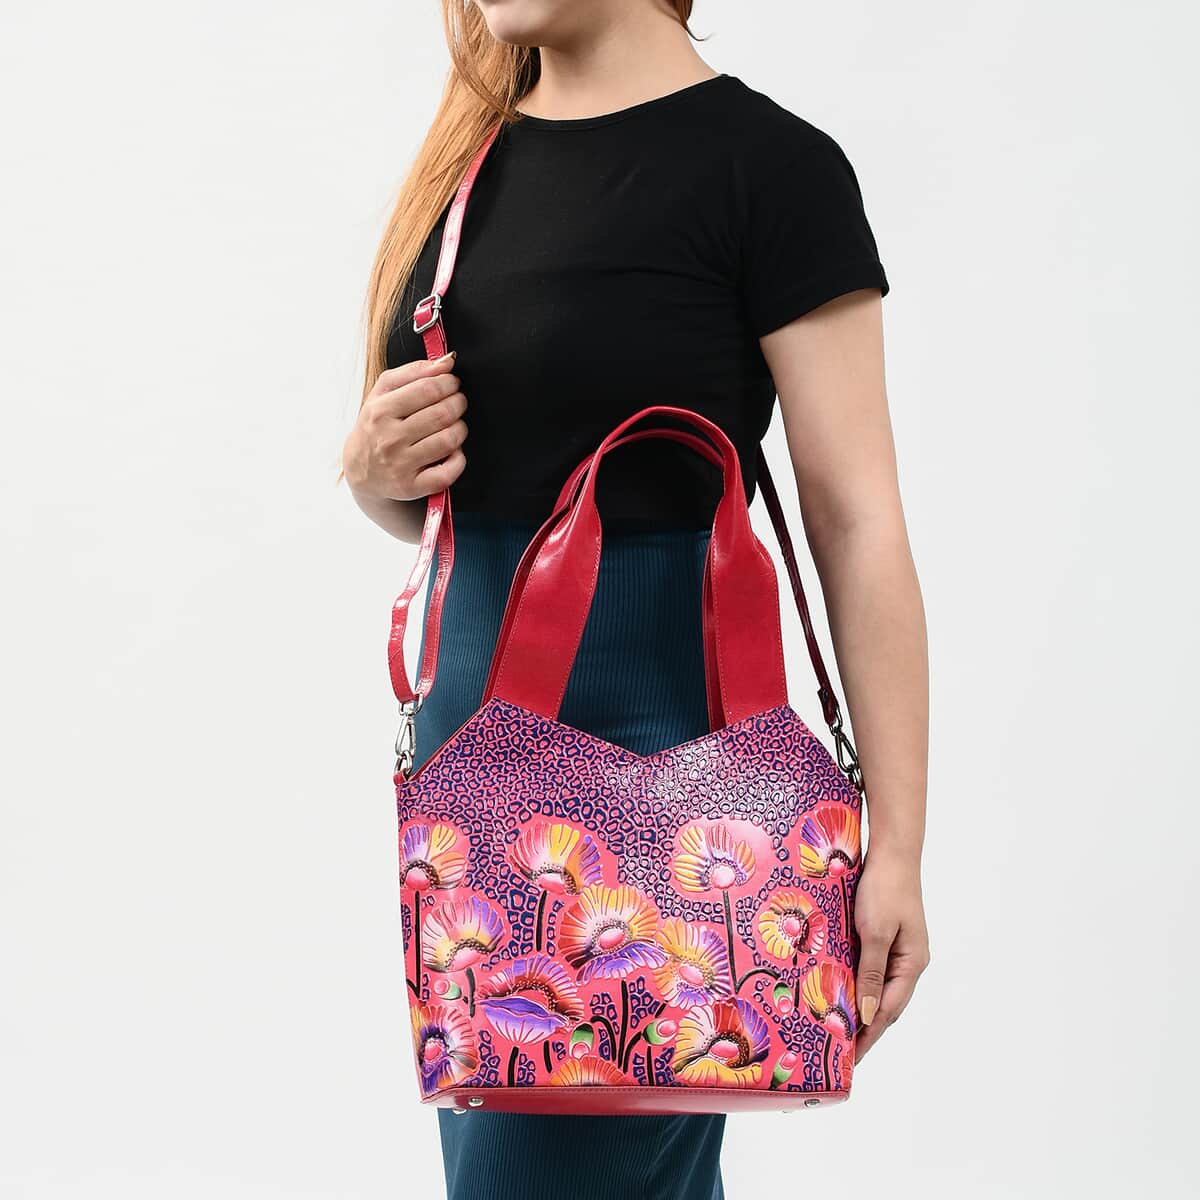 Vivid By SUKRITI Fuchsia 100% Genuine Leather Hand Painted Poppy Flower Shoulder Bag (13"x4"x9") with Detachable Strap image number 1